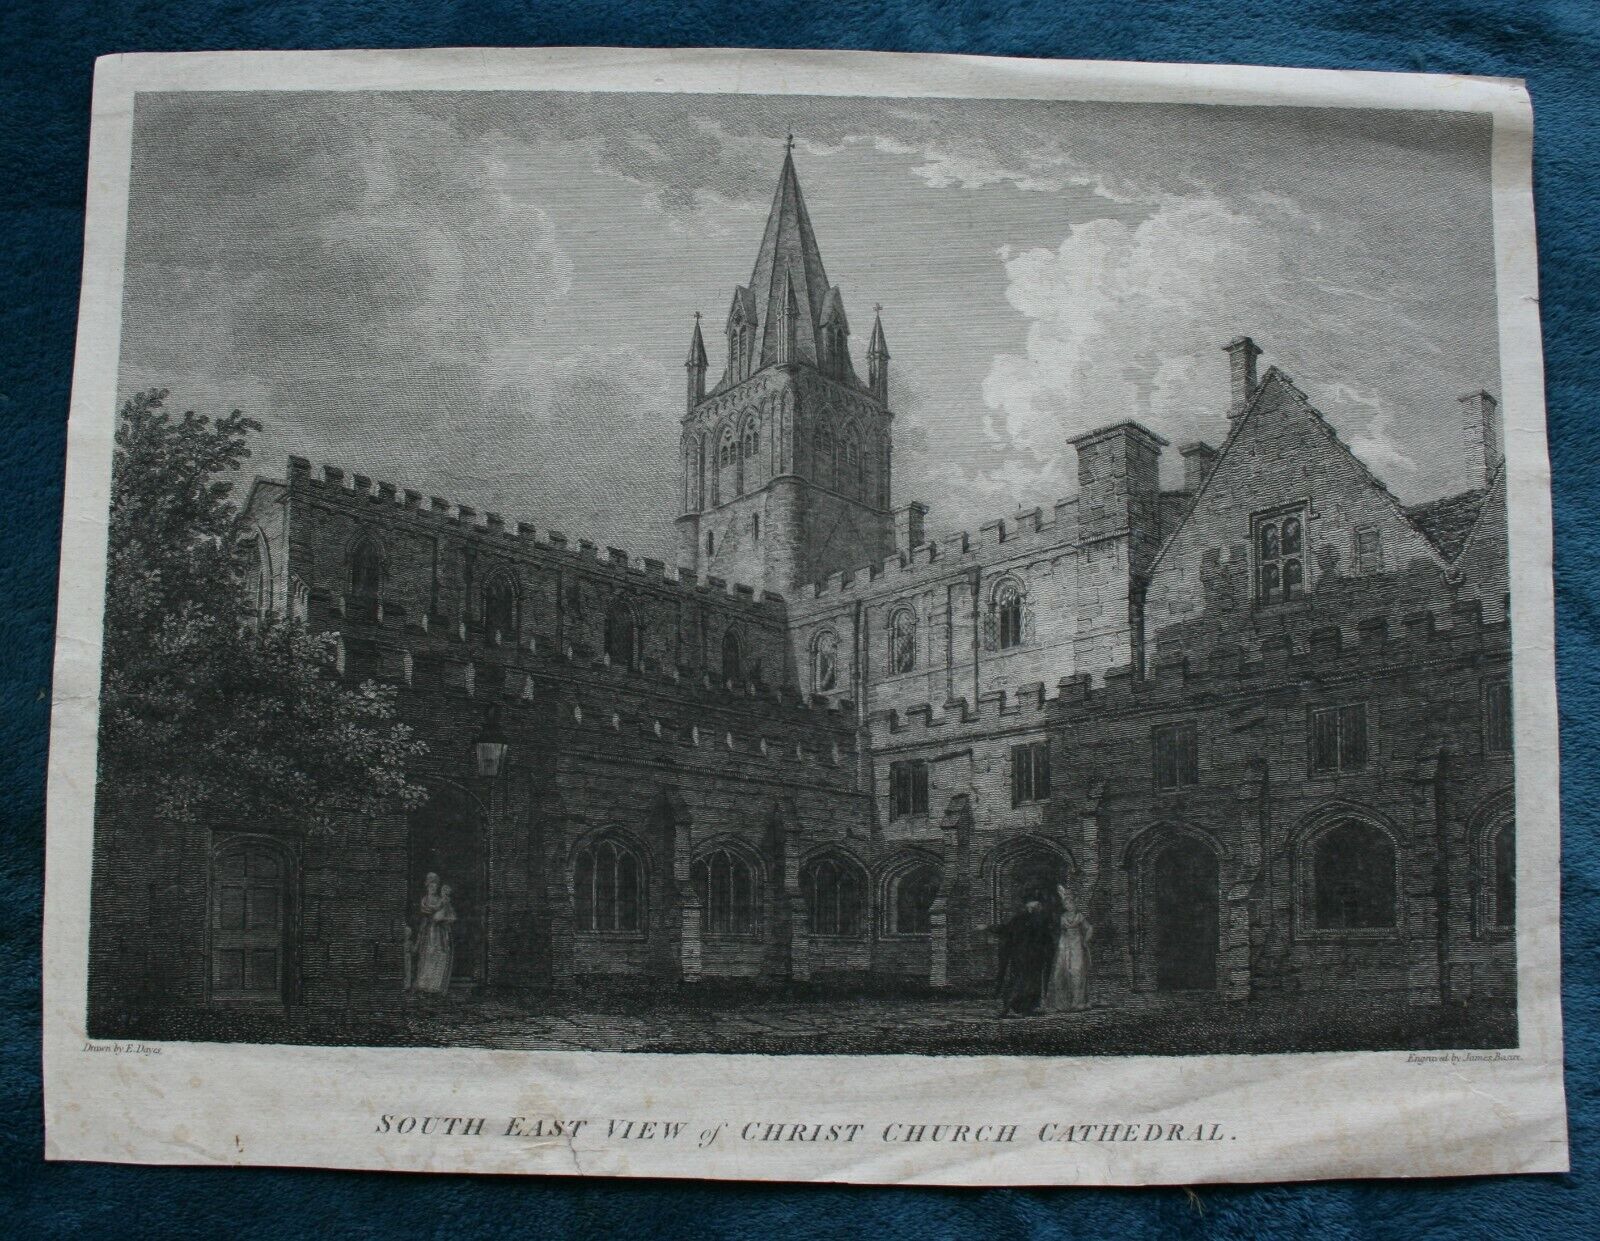 Oxford South East View of Christ Chruch Cathedral 数々のアワードを受賞 Skelton by 登場大人気アイテム pub